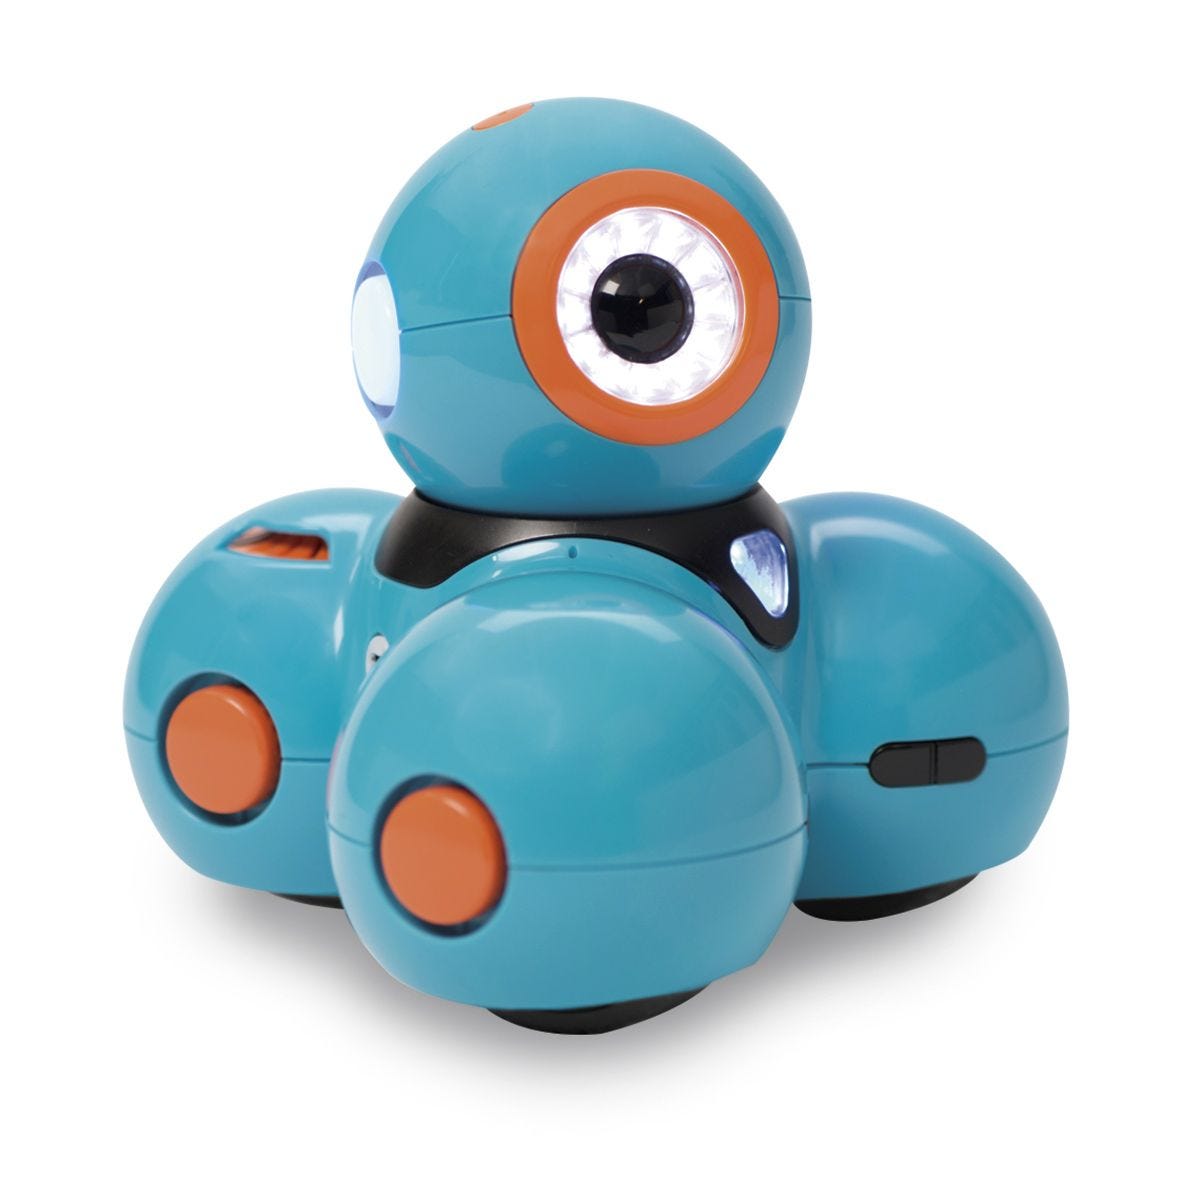 What you need to know about dash and dot robotics for kids